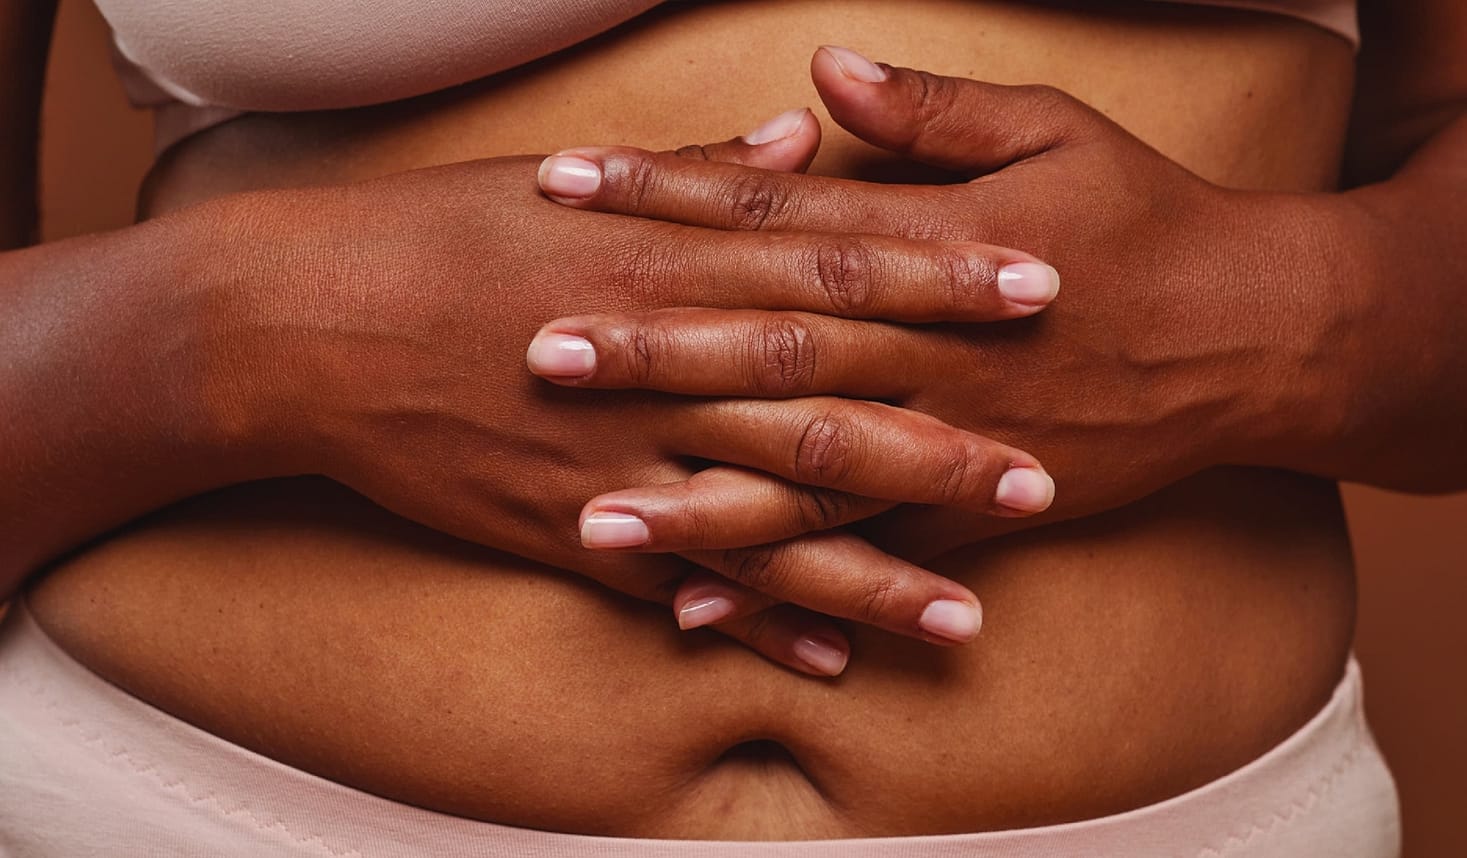 Woman with hands crossed Infront of stomach